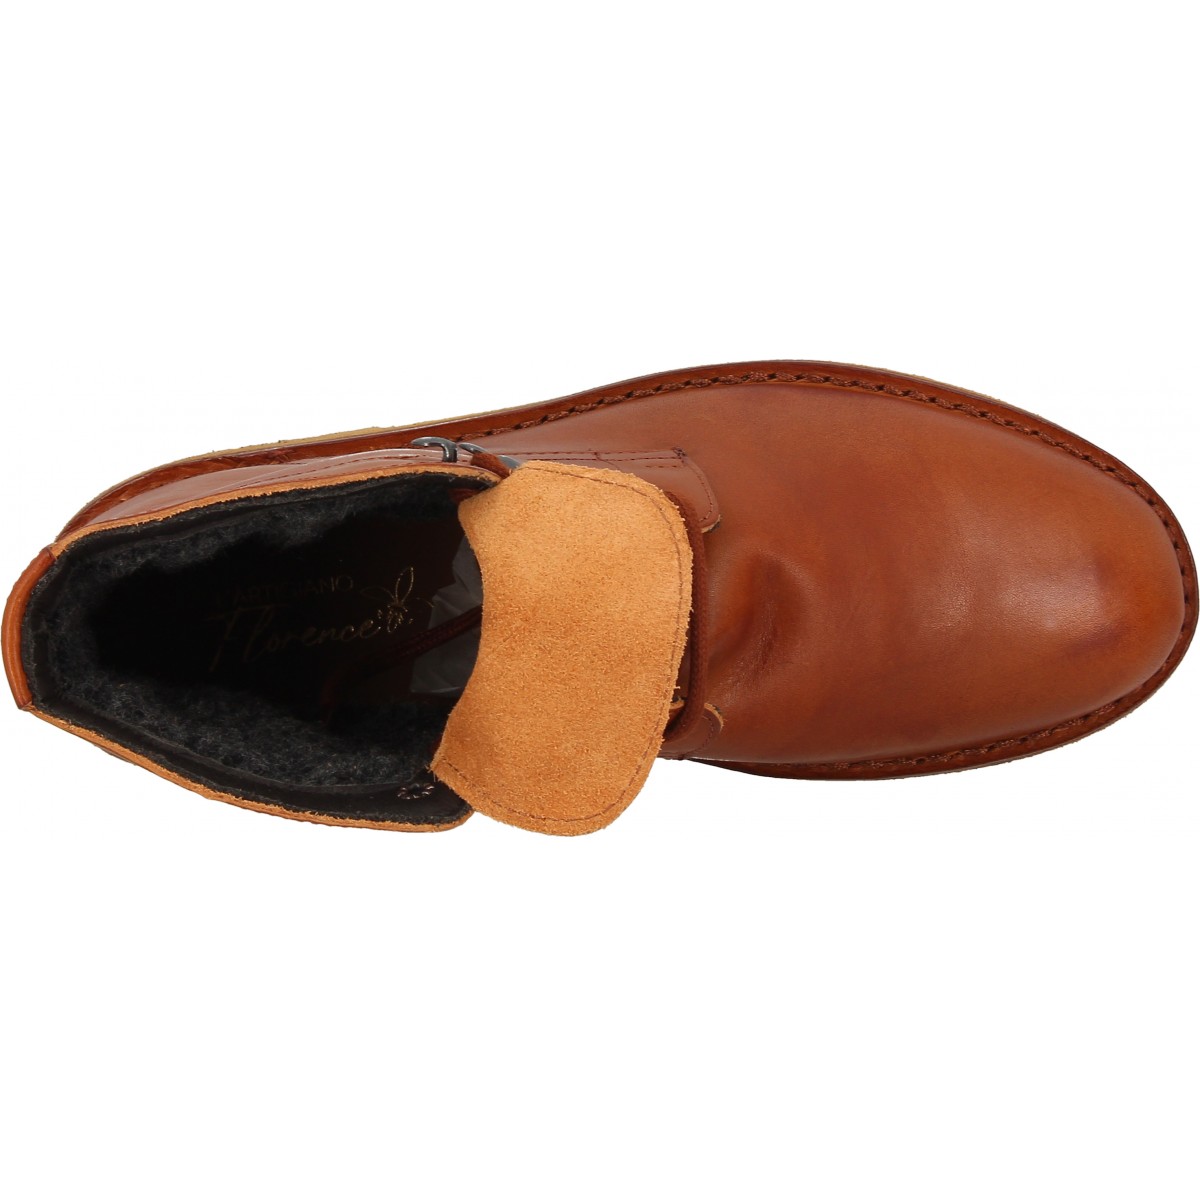 Men's tan leather ankle boots with winter lining | The leather craftsmen